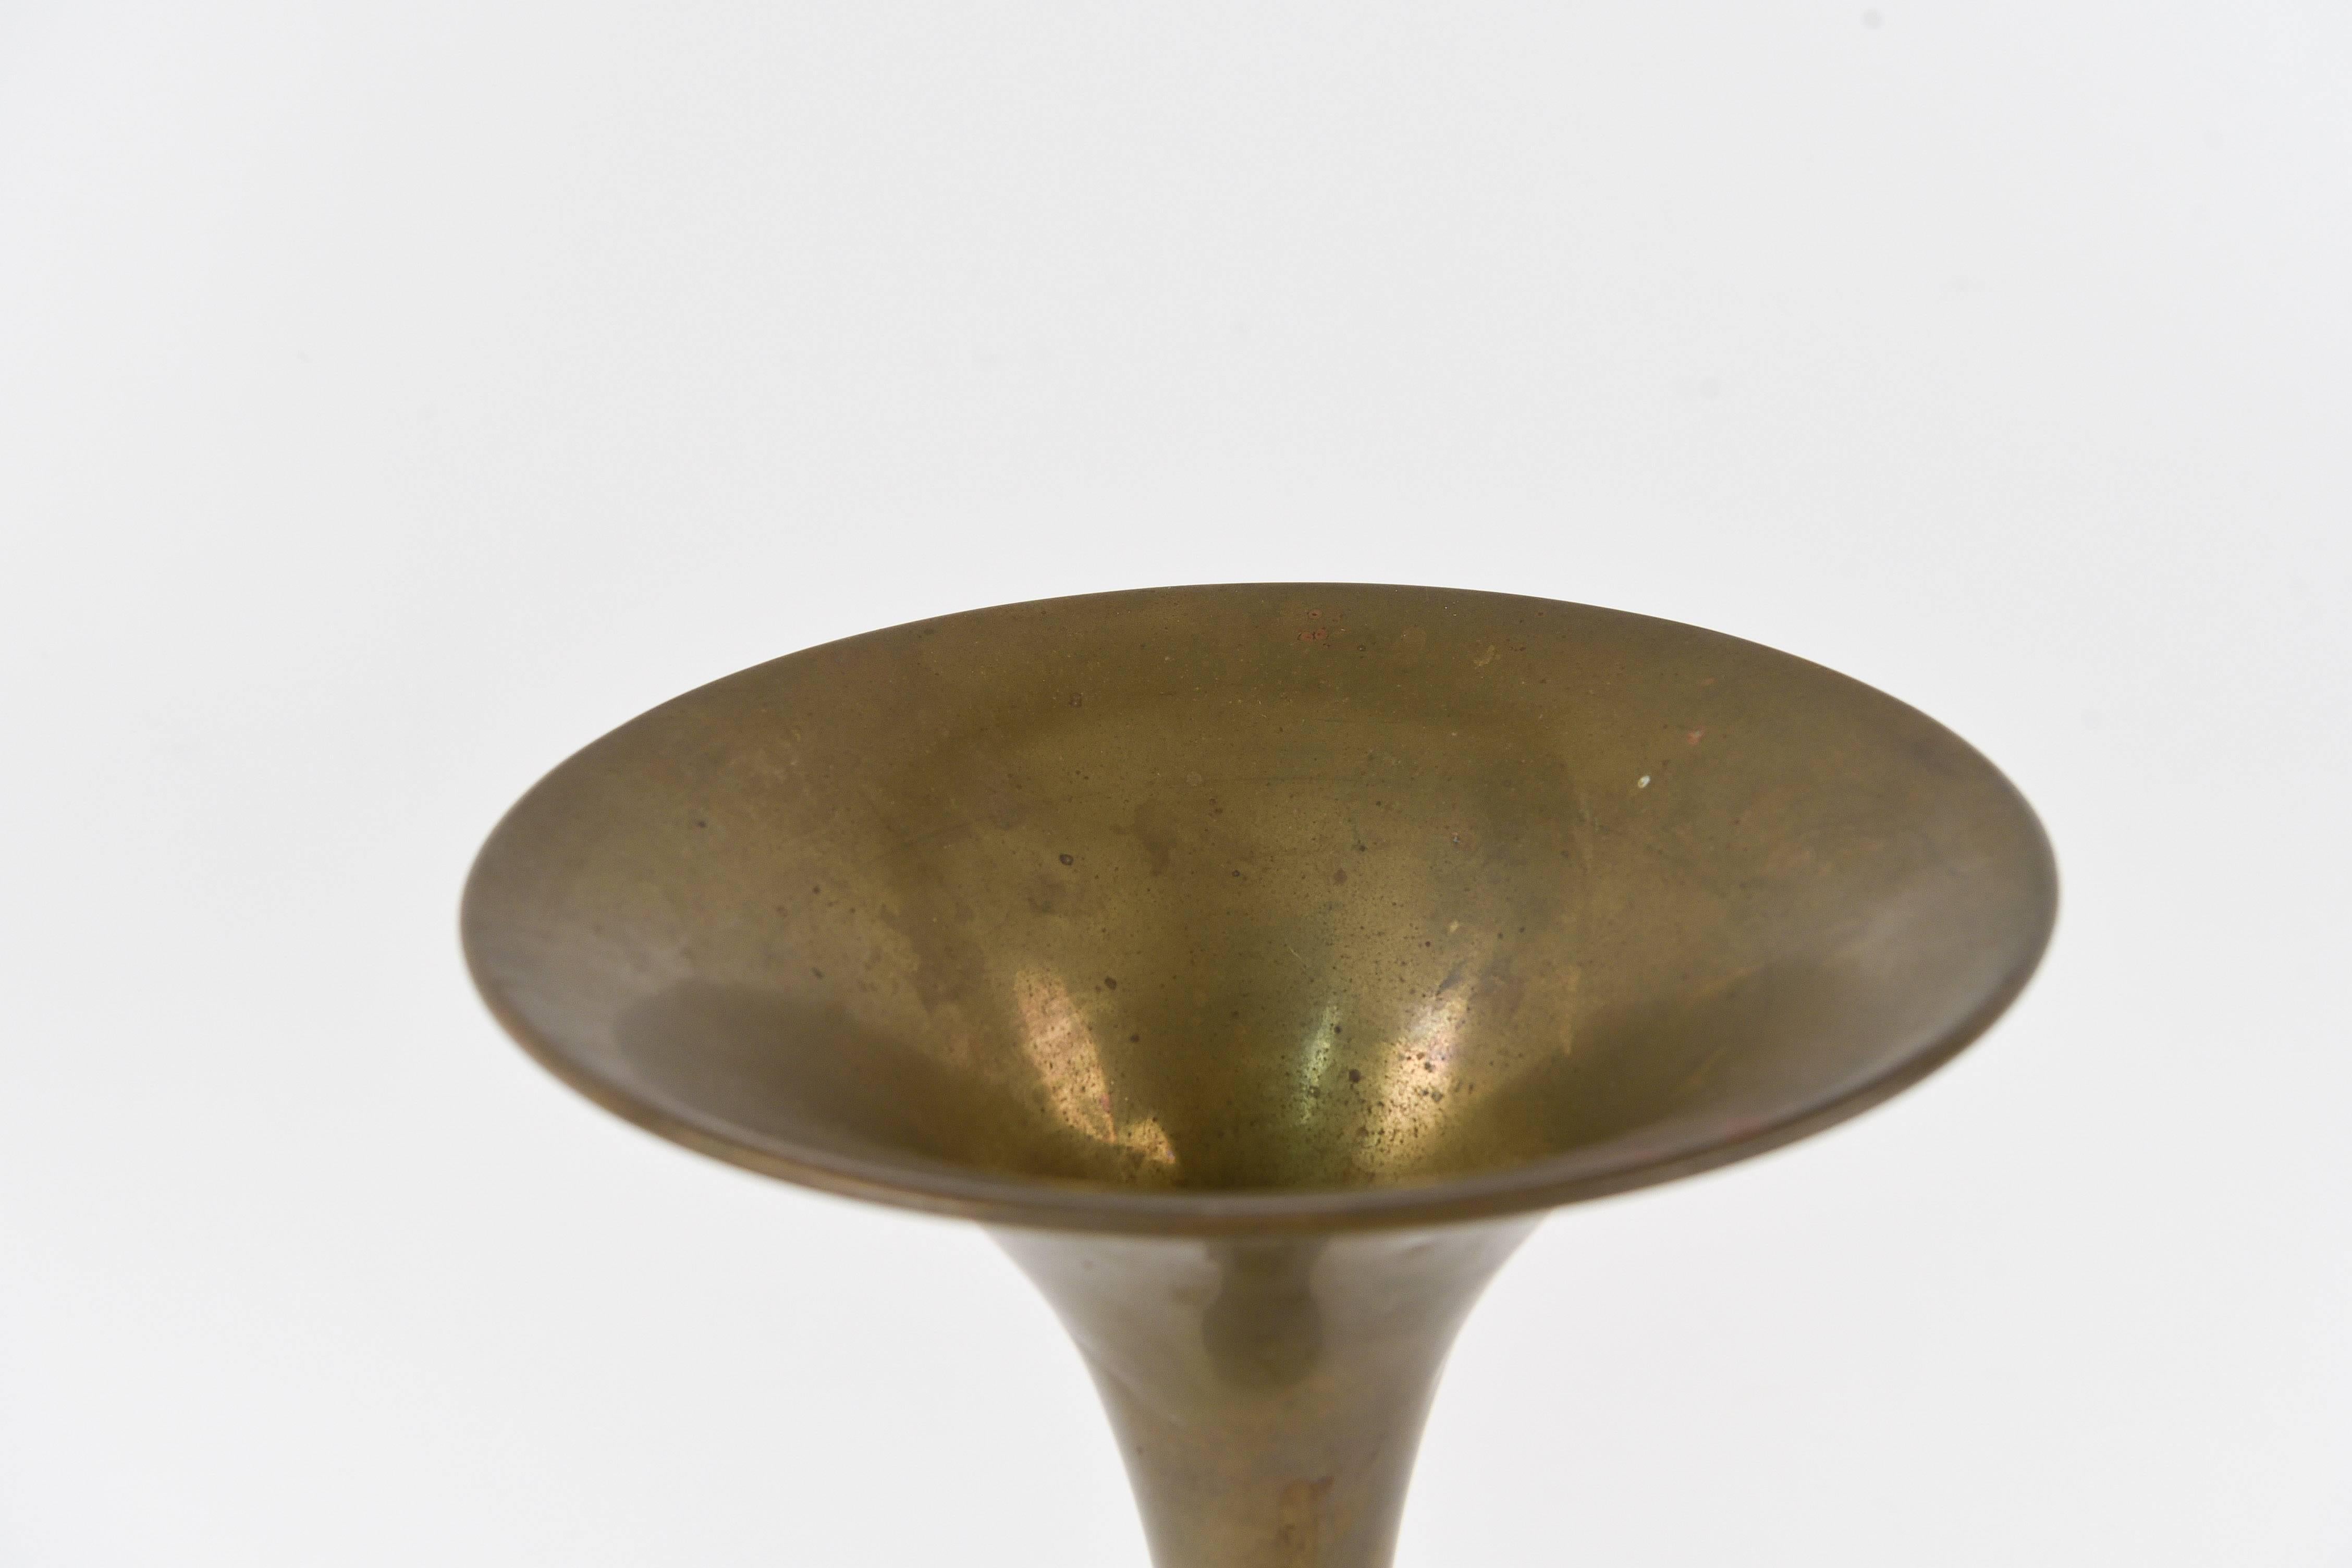 A very nice form, this Japanese brass vase could have also been a lamp base at one time and may need a liner to hold water, but just as it sits it would make a wonderful addition to any sculpture collection.